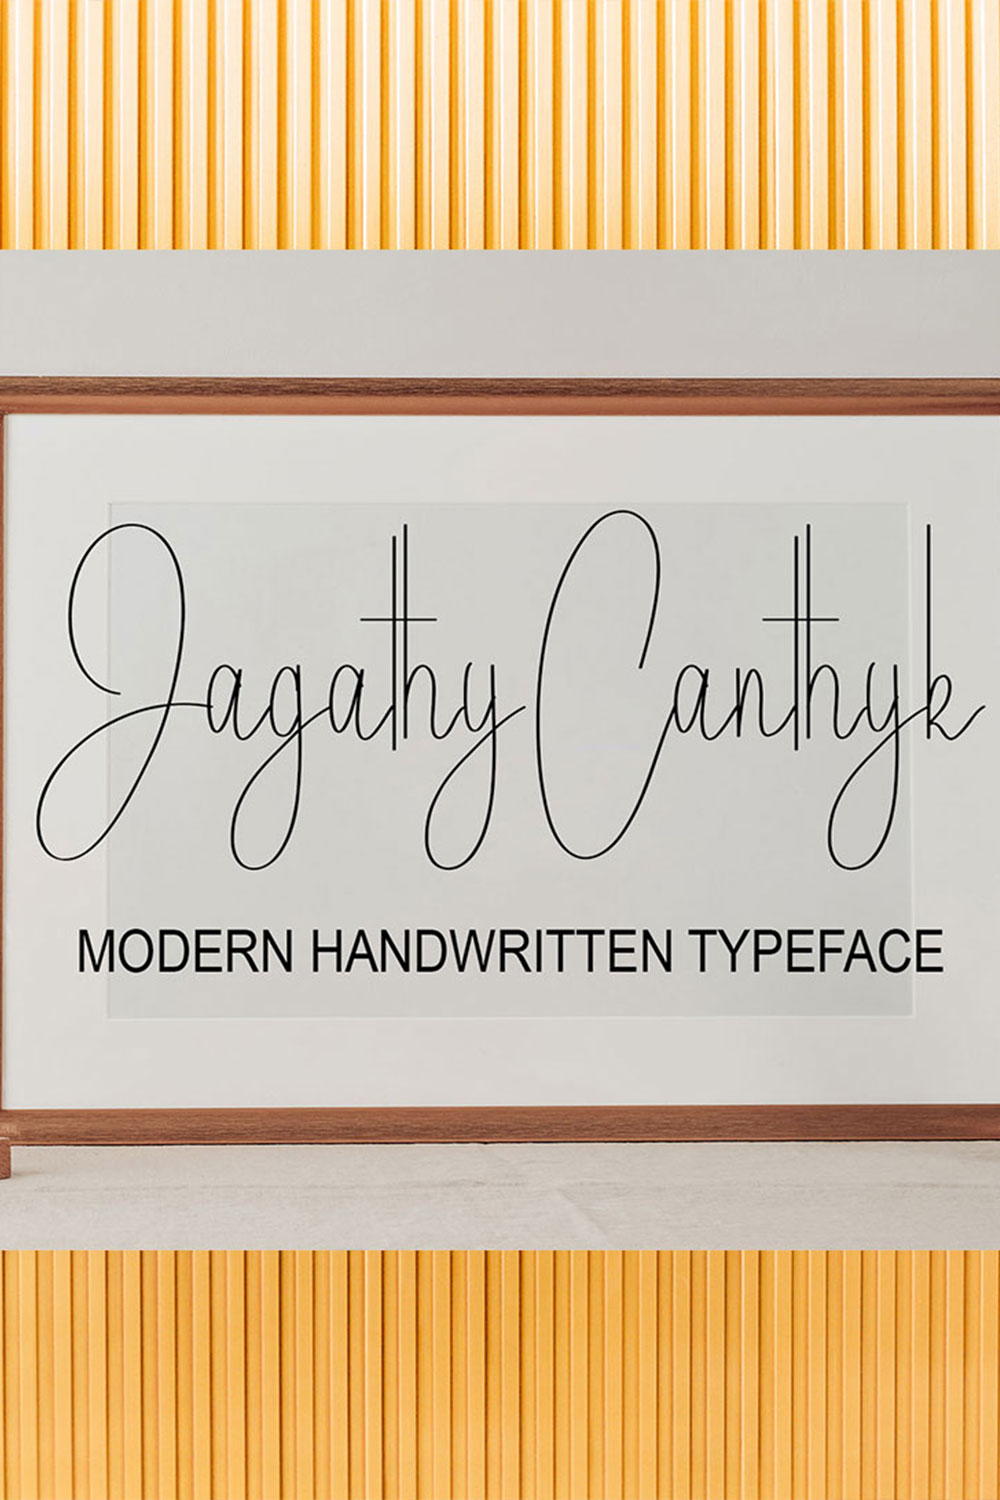 An image with text showing the unique Jagathy Canthyk font.